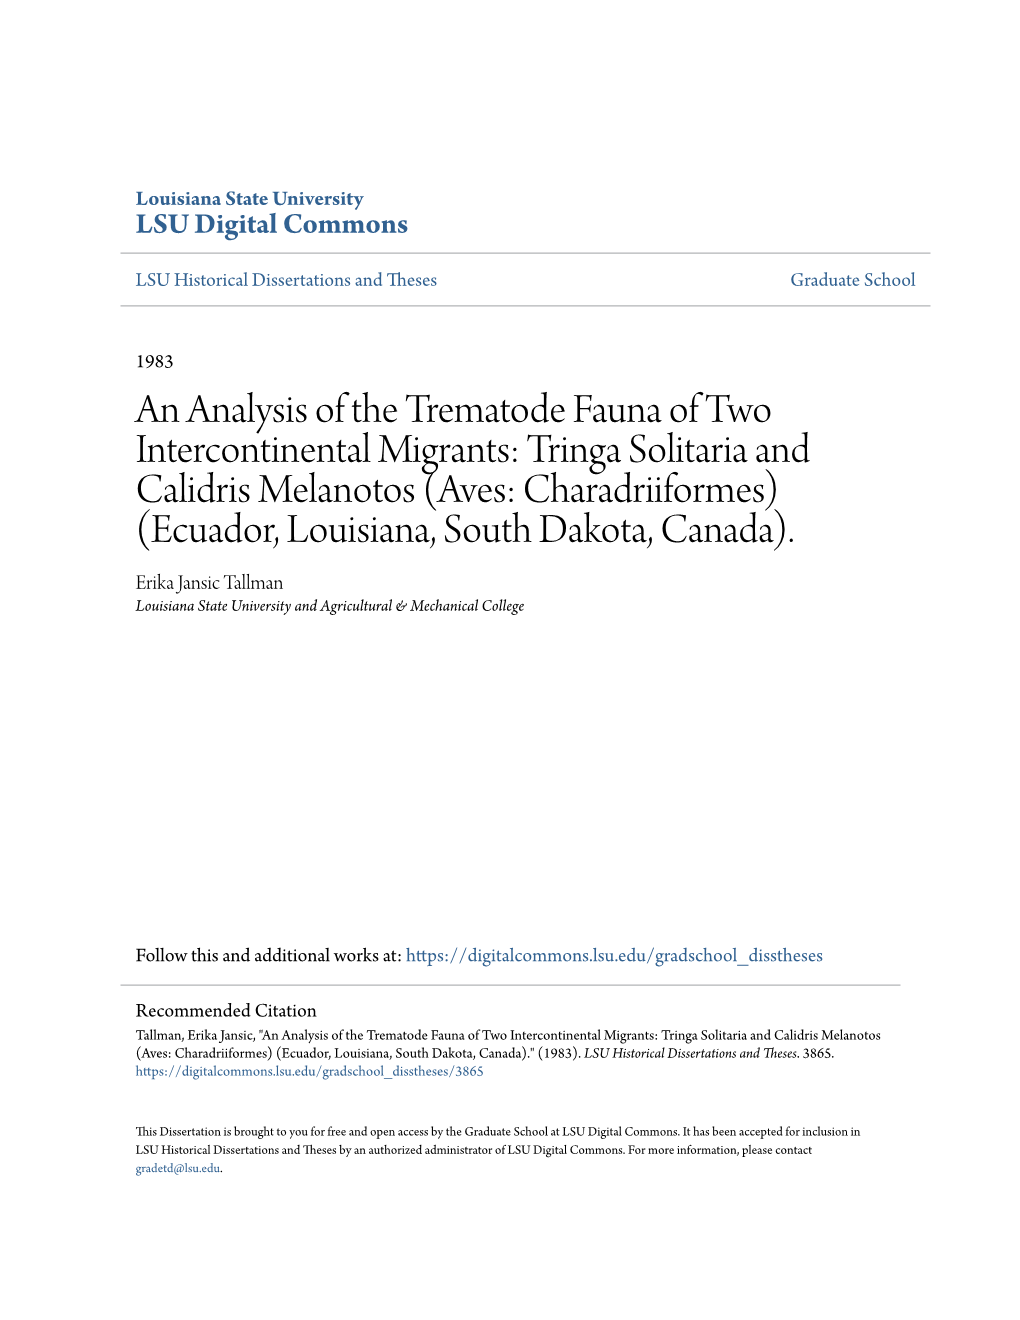 An Analysis of the Trematode Fauna of Two Intercontinental Migrants